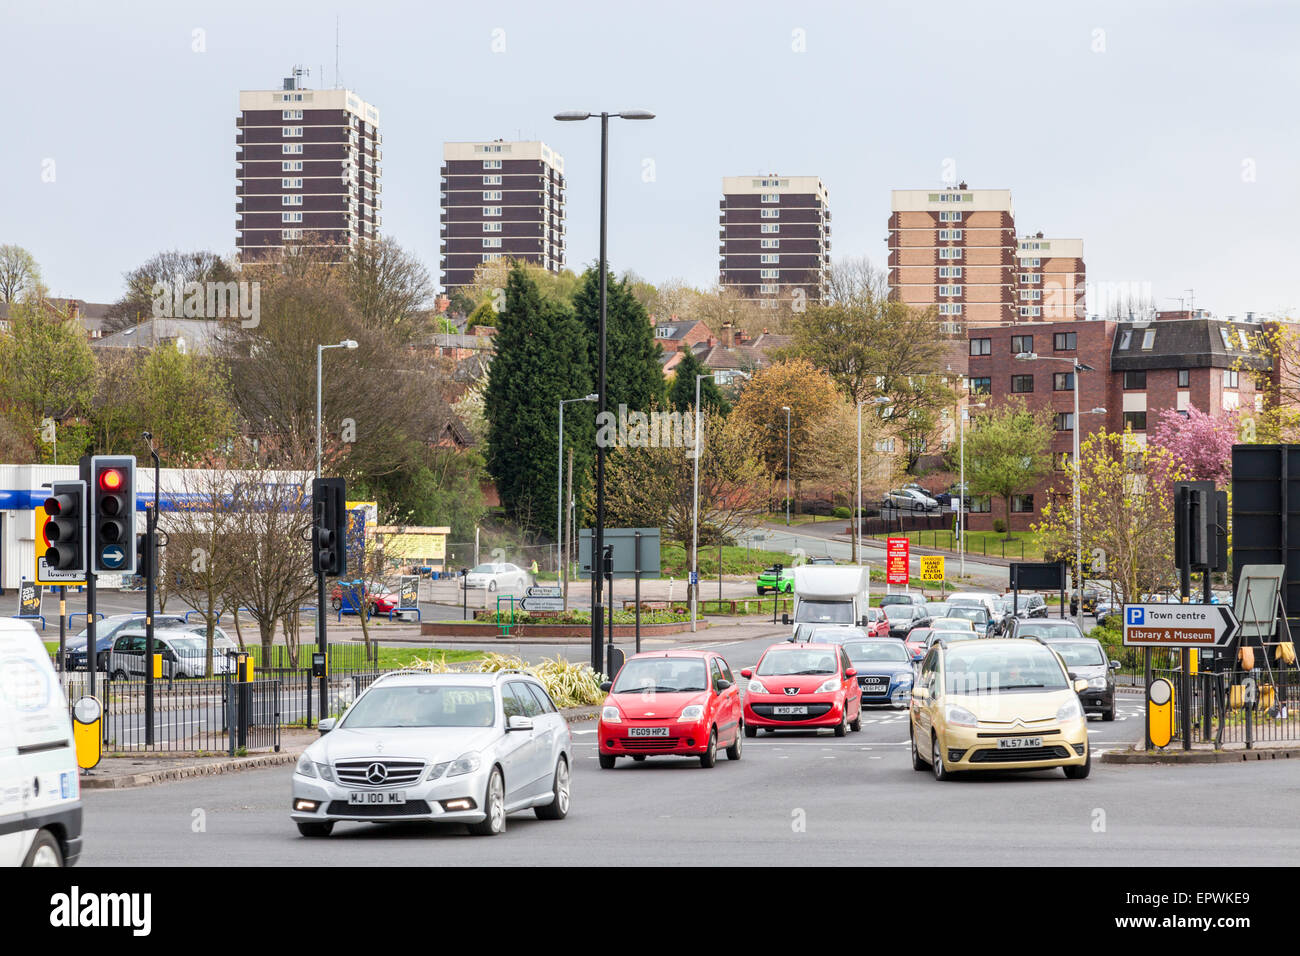 Traffic on the A4148 road, Broadway North, Walsall, with residential tower blocks in the distance. West Midlands, England, UK Stock Photo